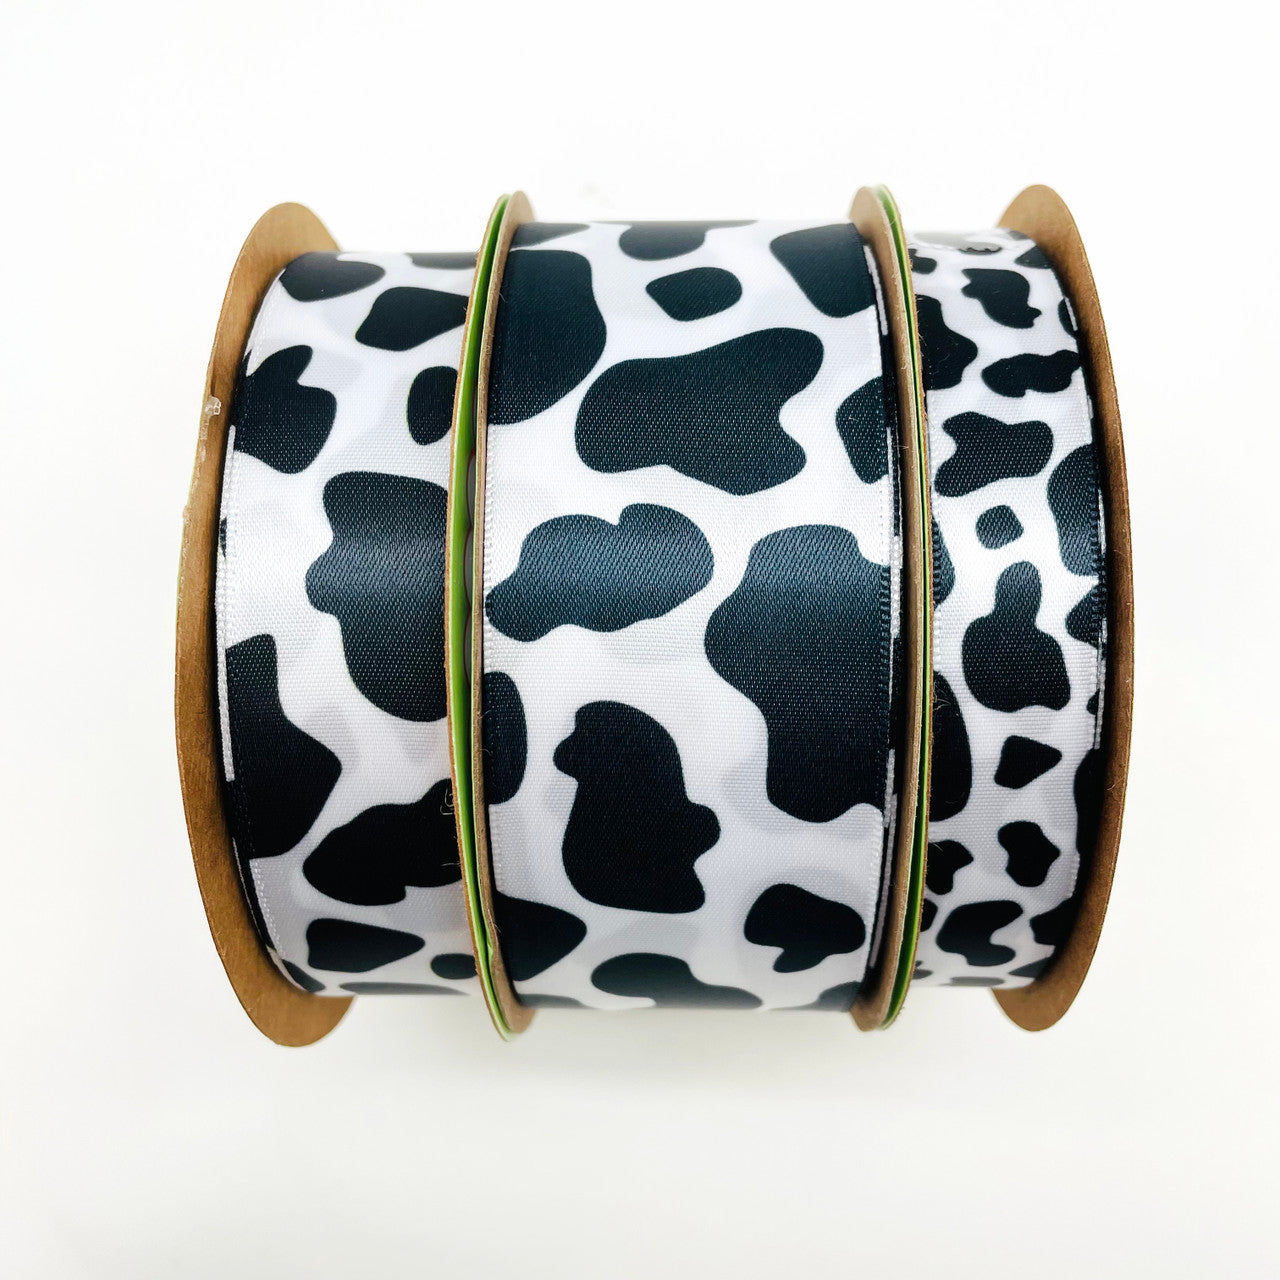 Our cow print ribbon is available in 5/8", 7/8" and 1.5" widths for all your crafting needs from gift wrapping, to wreath making and party favors! 